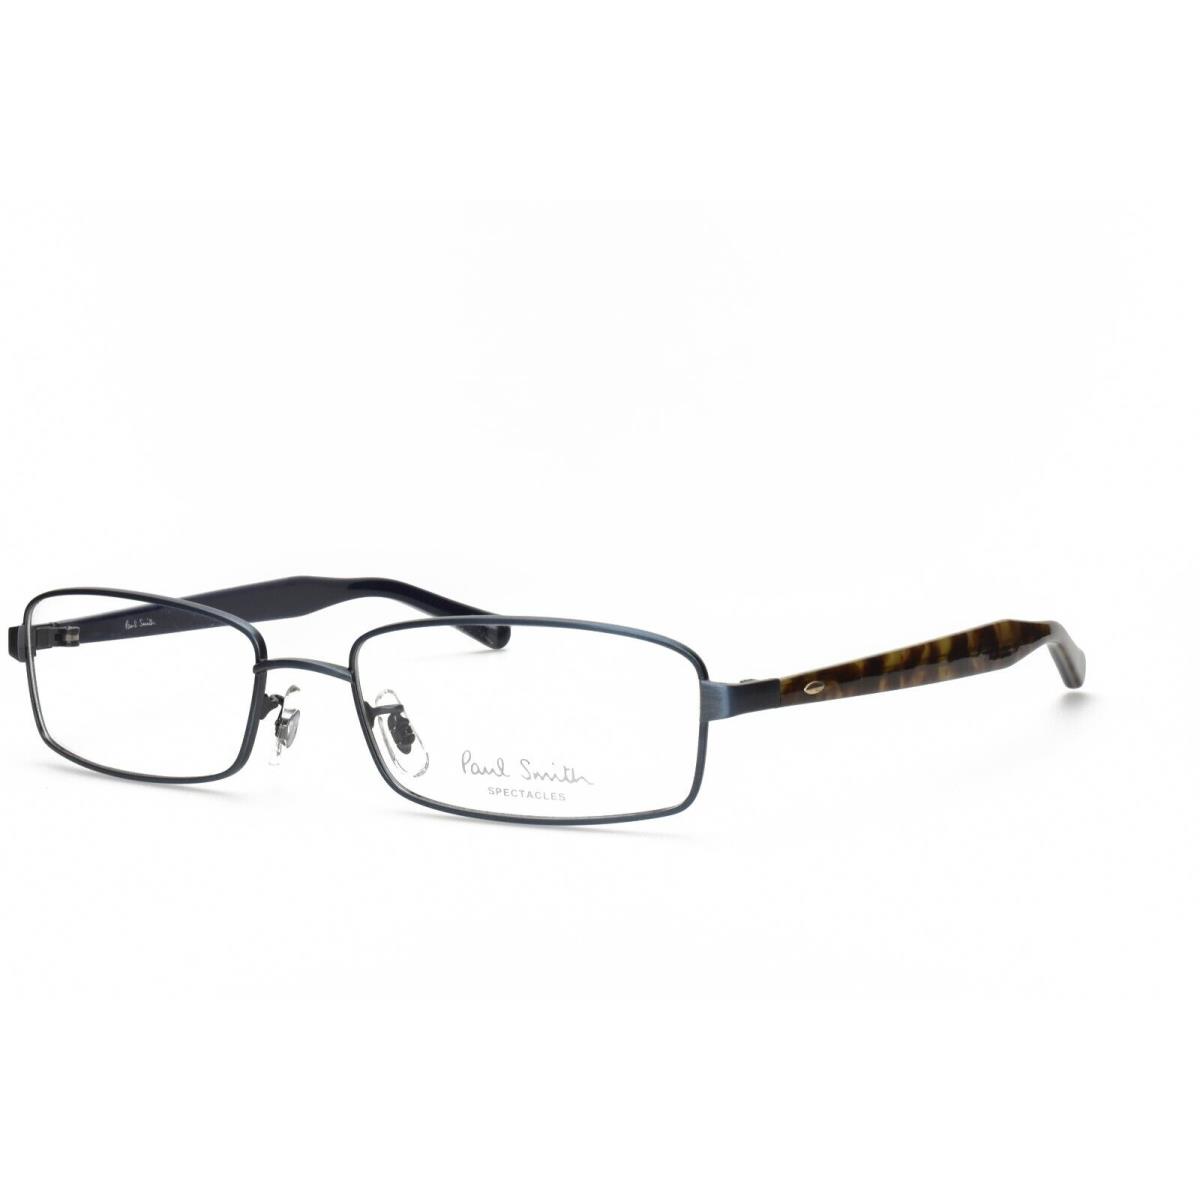 Paul Smith PS 1009 Navy/chmb Eyeglasses Frames Only 53-17-140